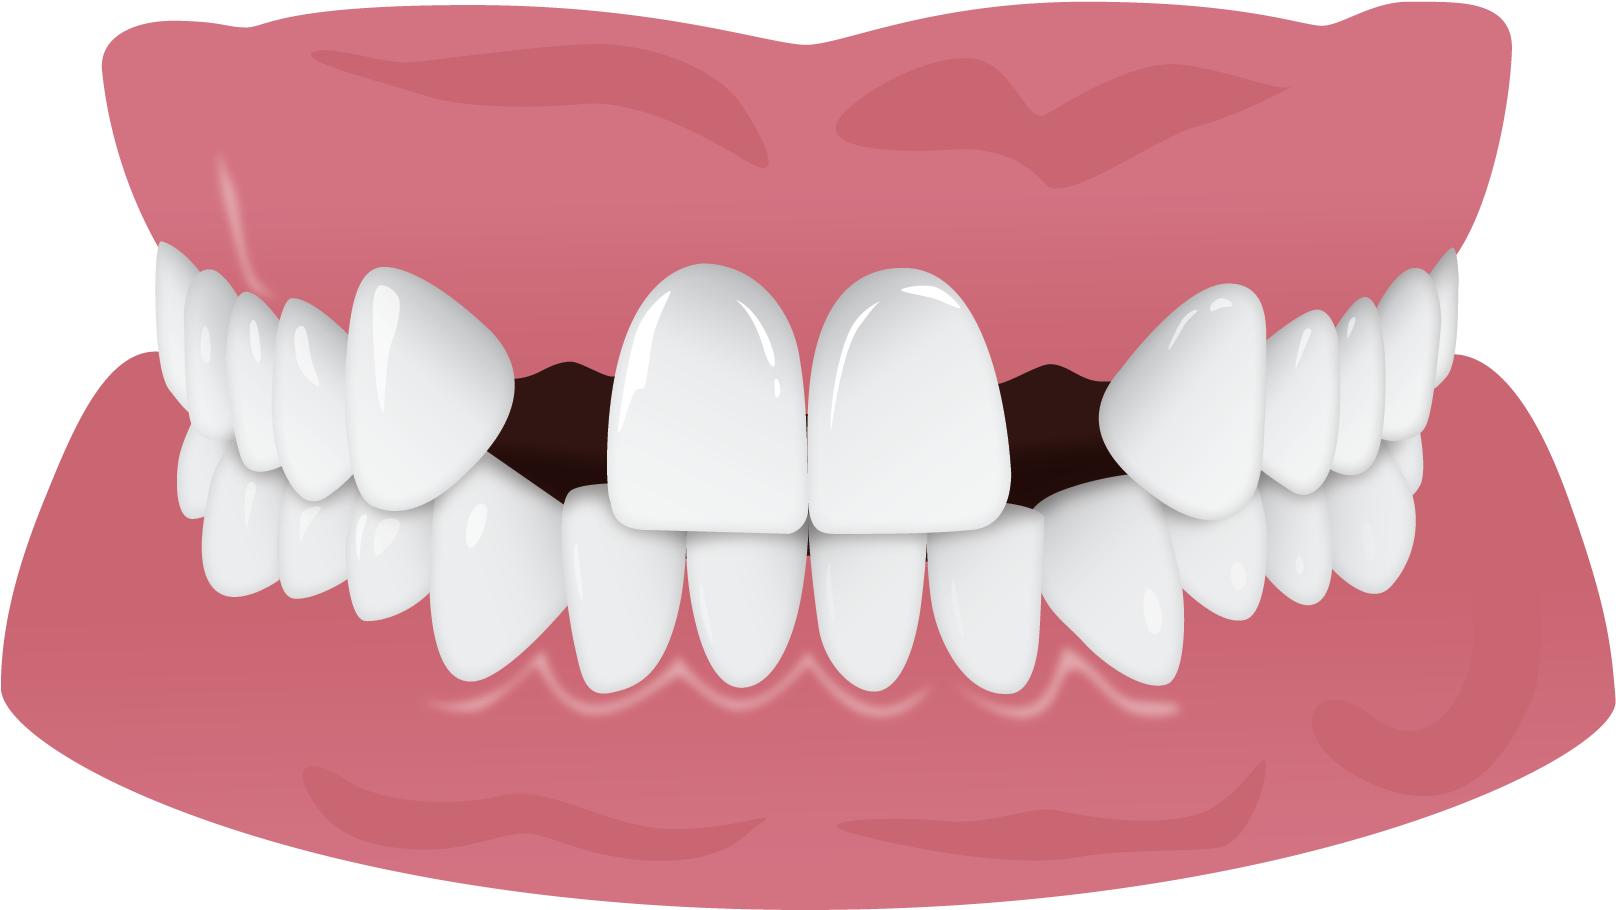 Healthy Teeth Illustration.png PNG